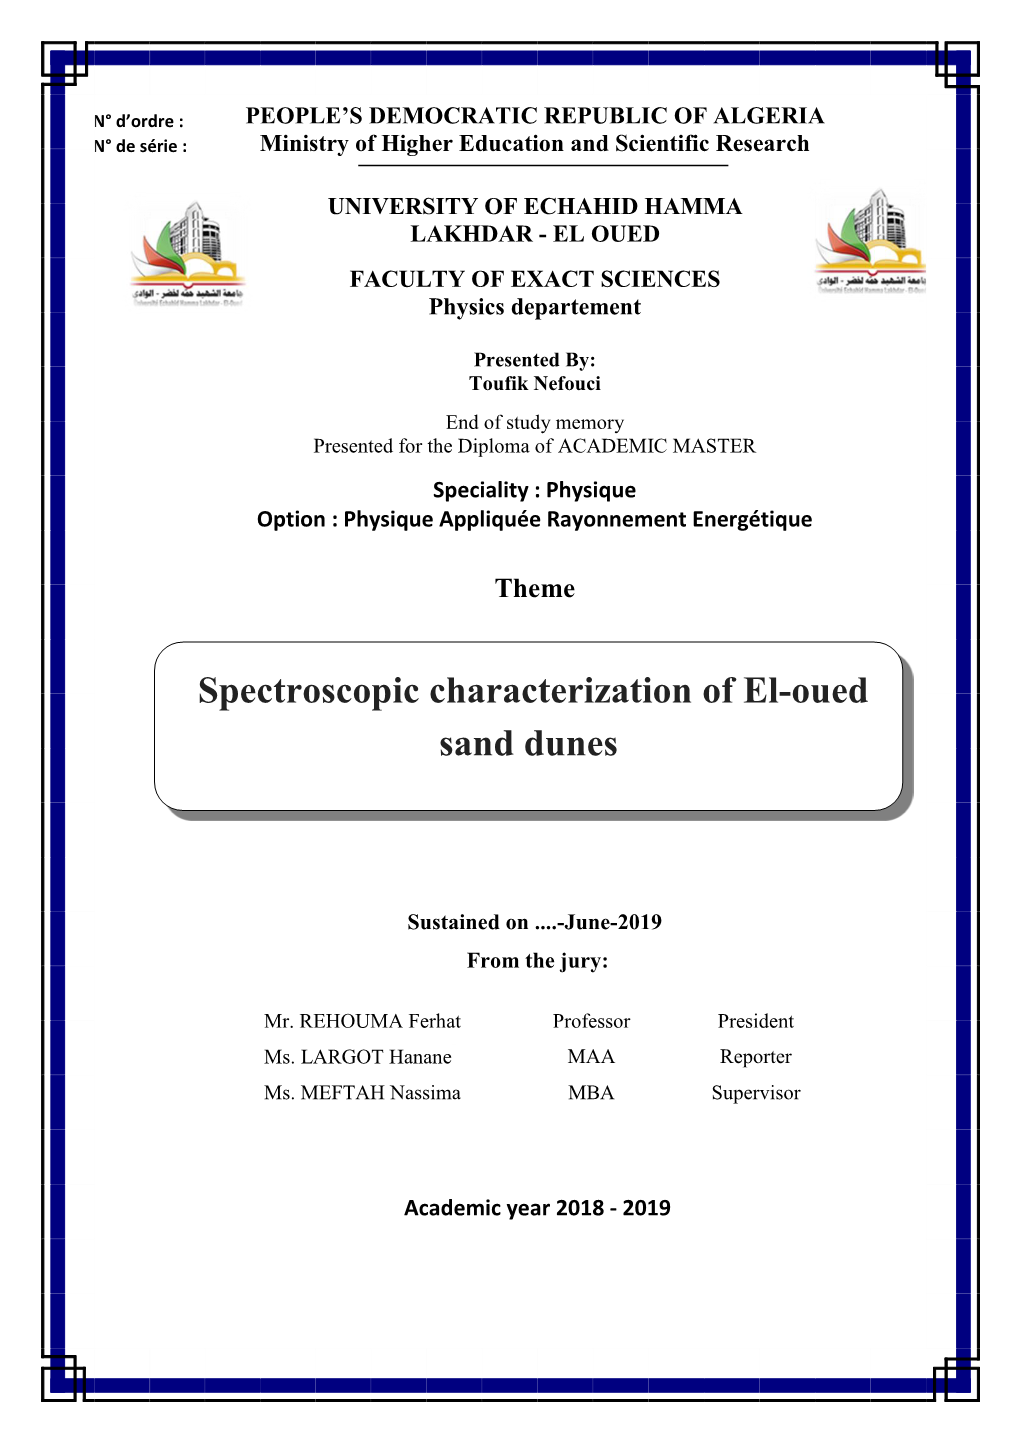 Spectroscopic Characterization of El-Oued Sand Dunes